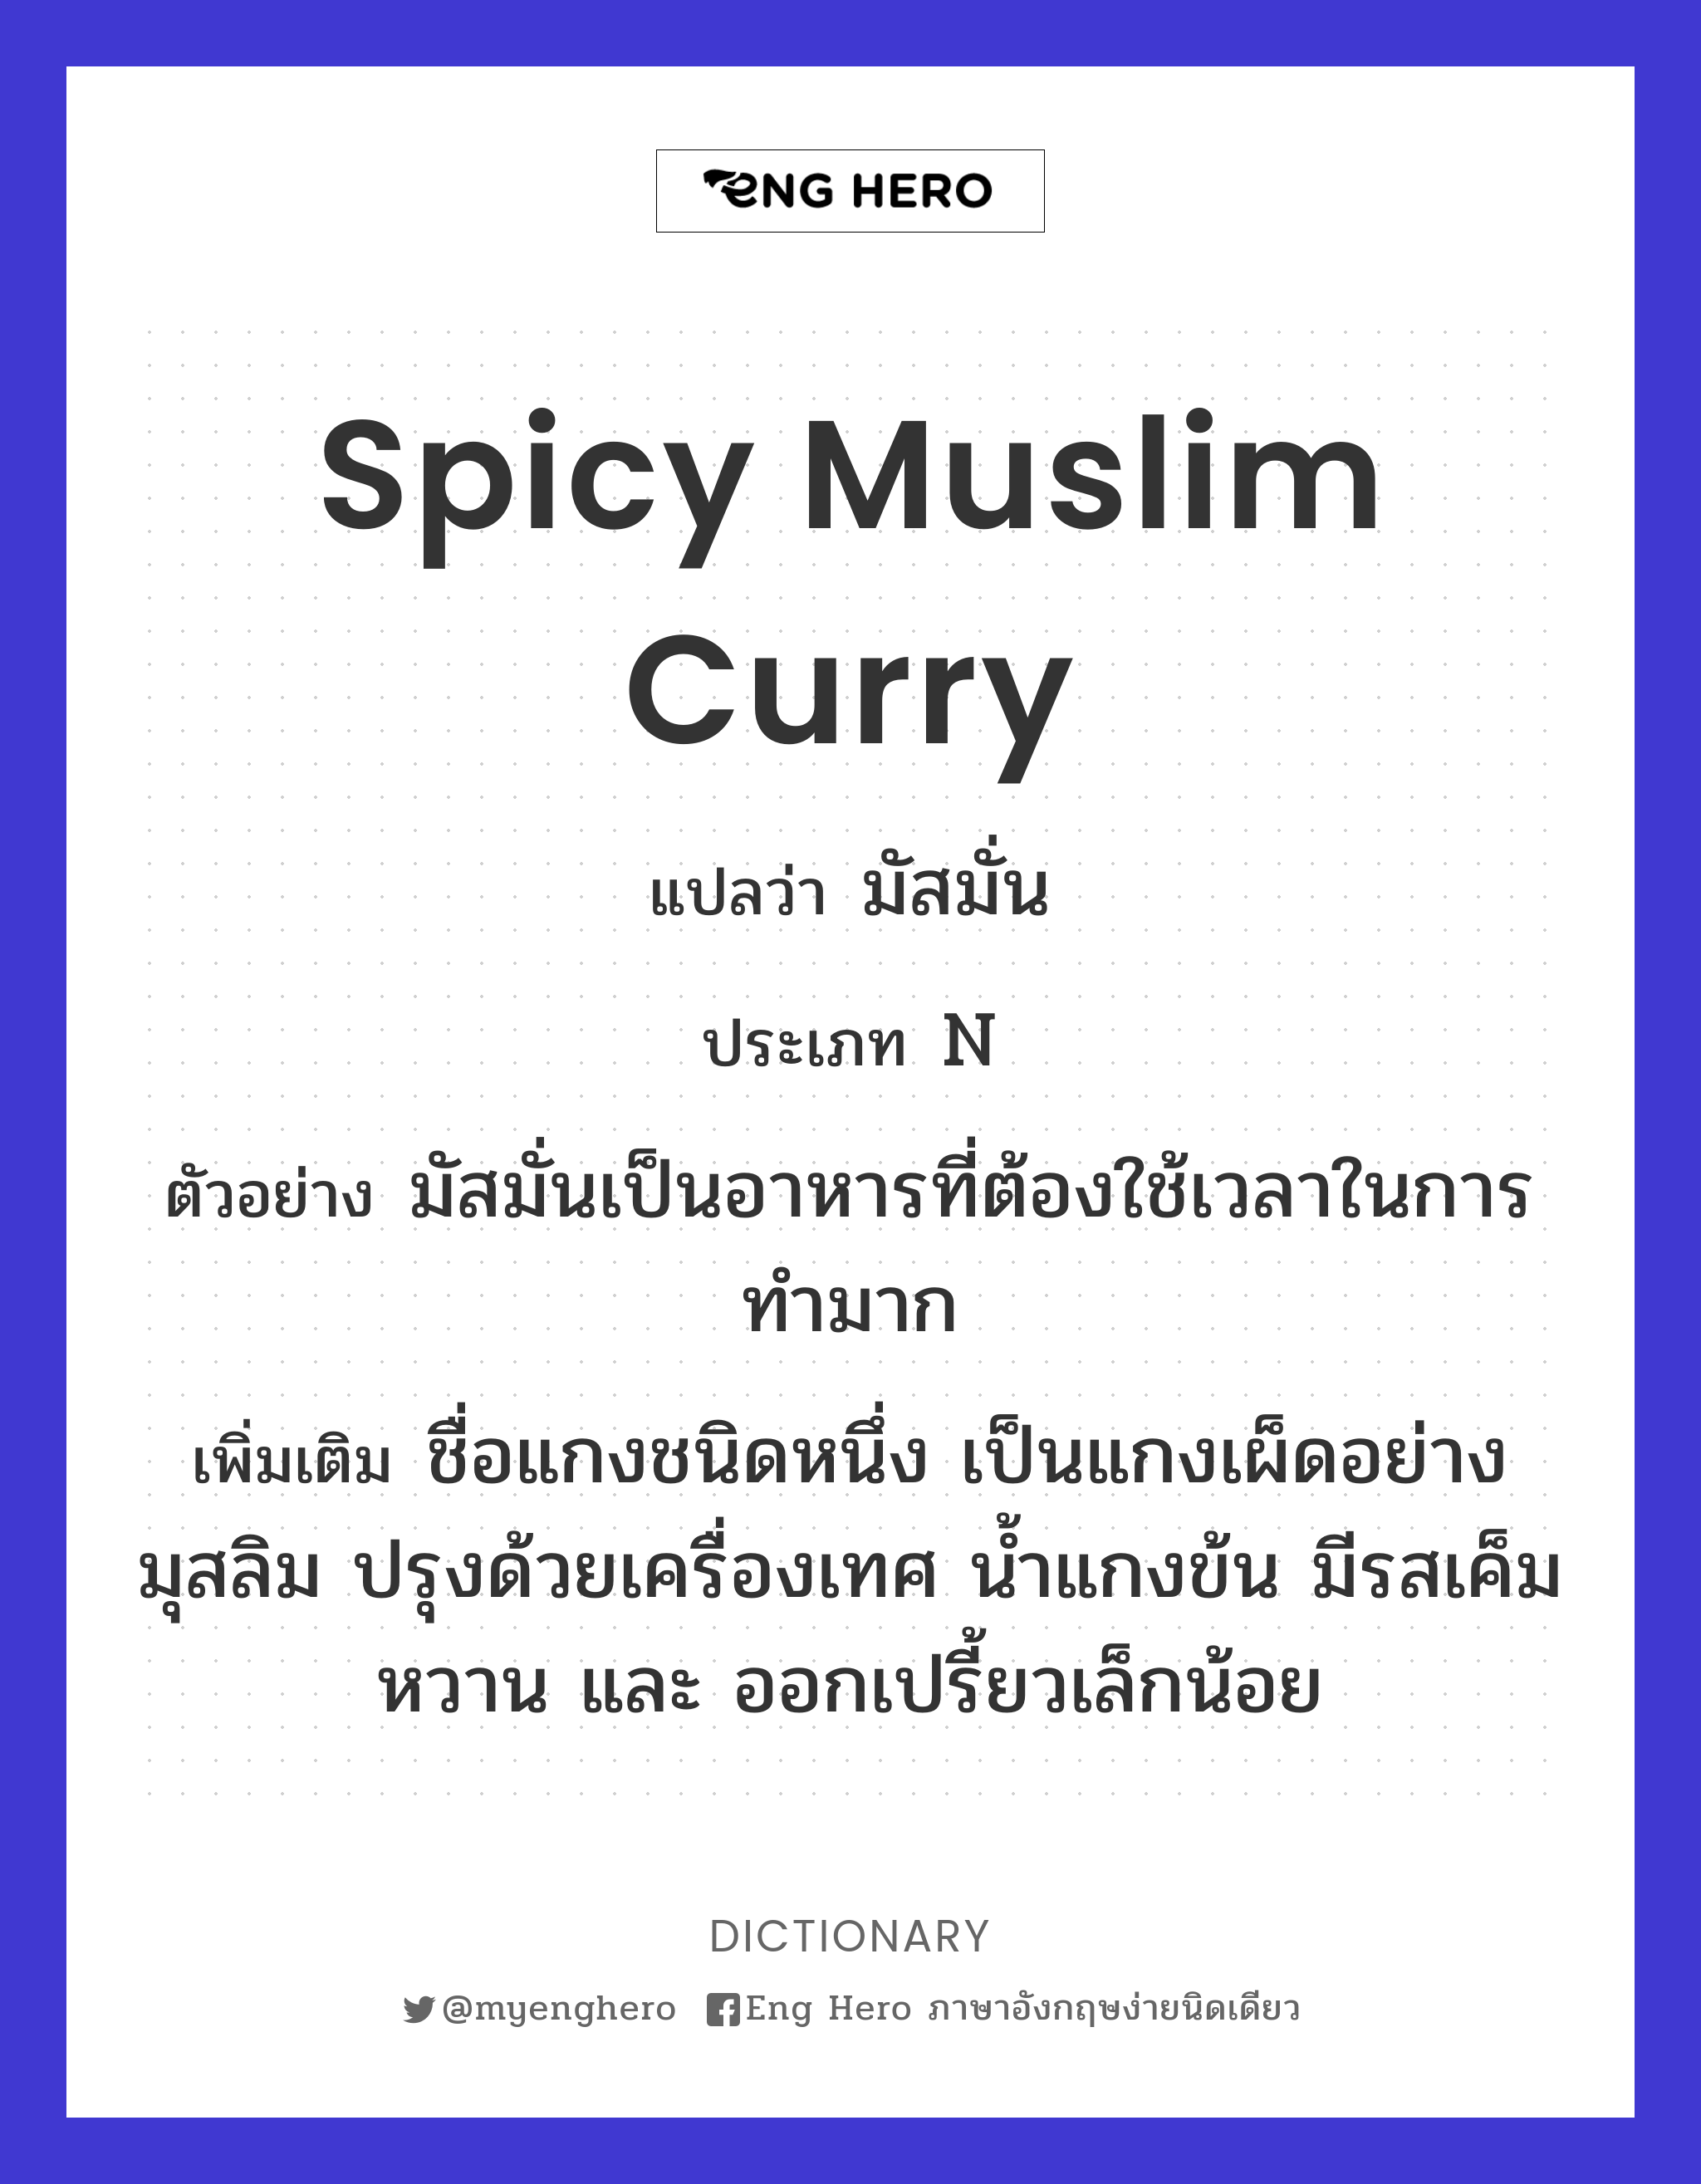 spicy Muslim curry